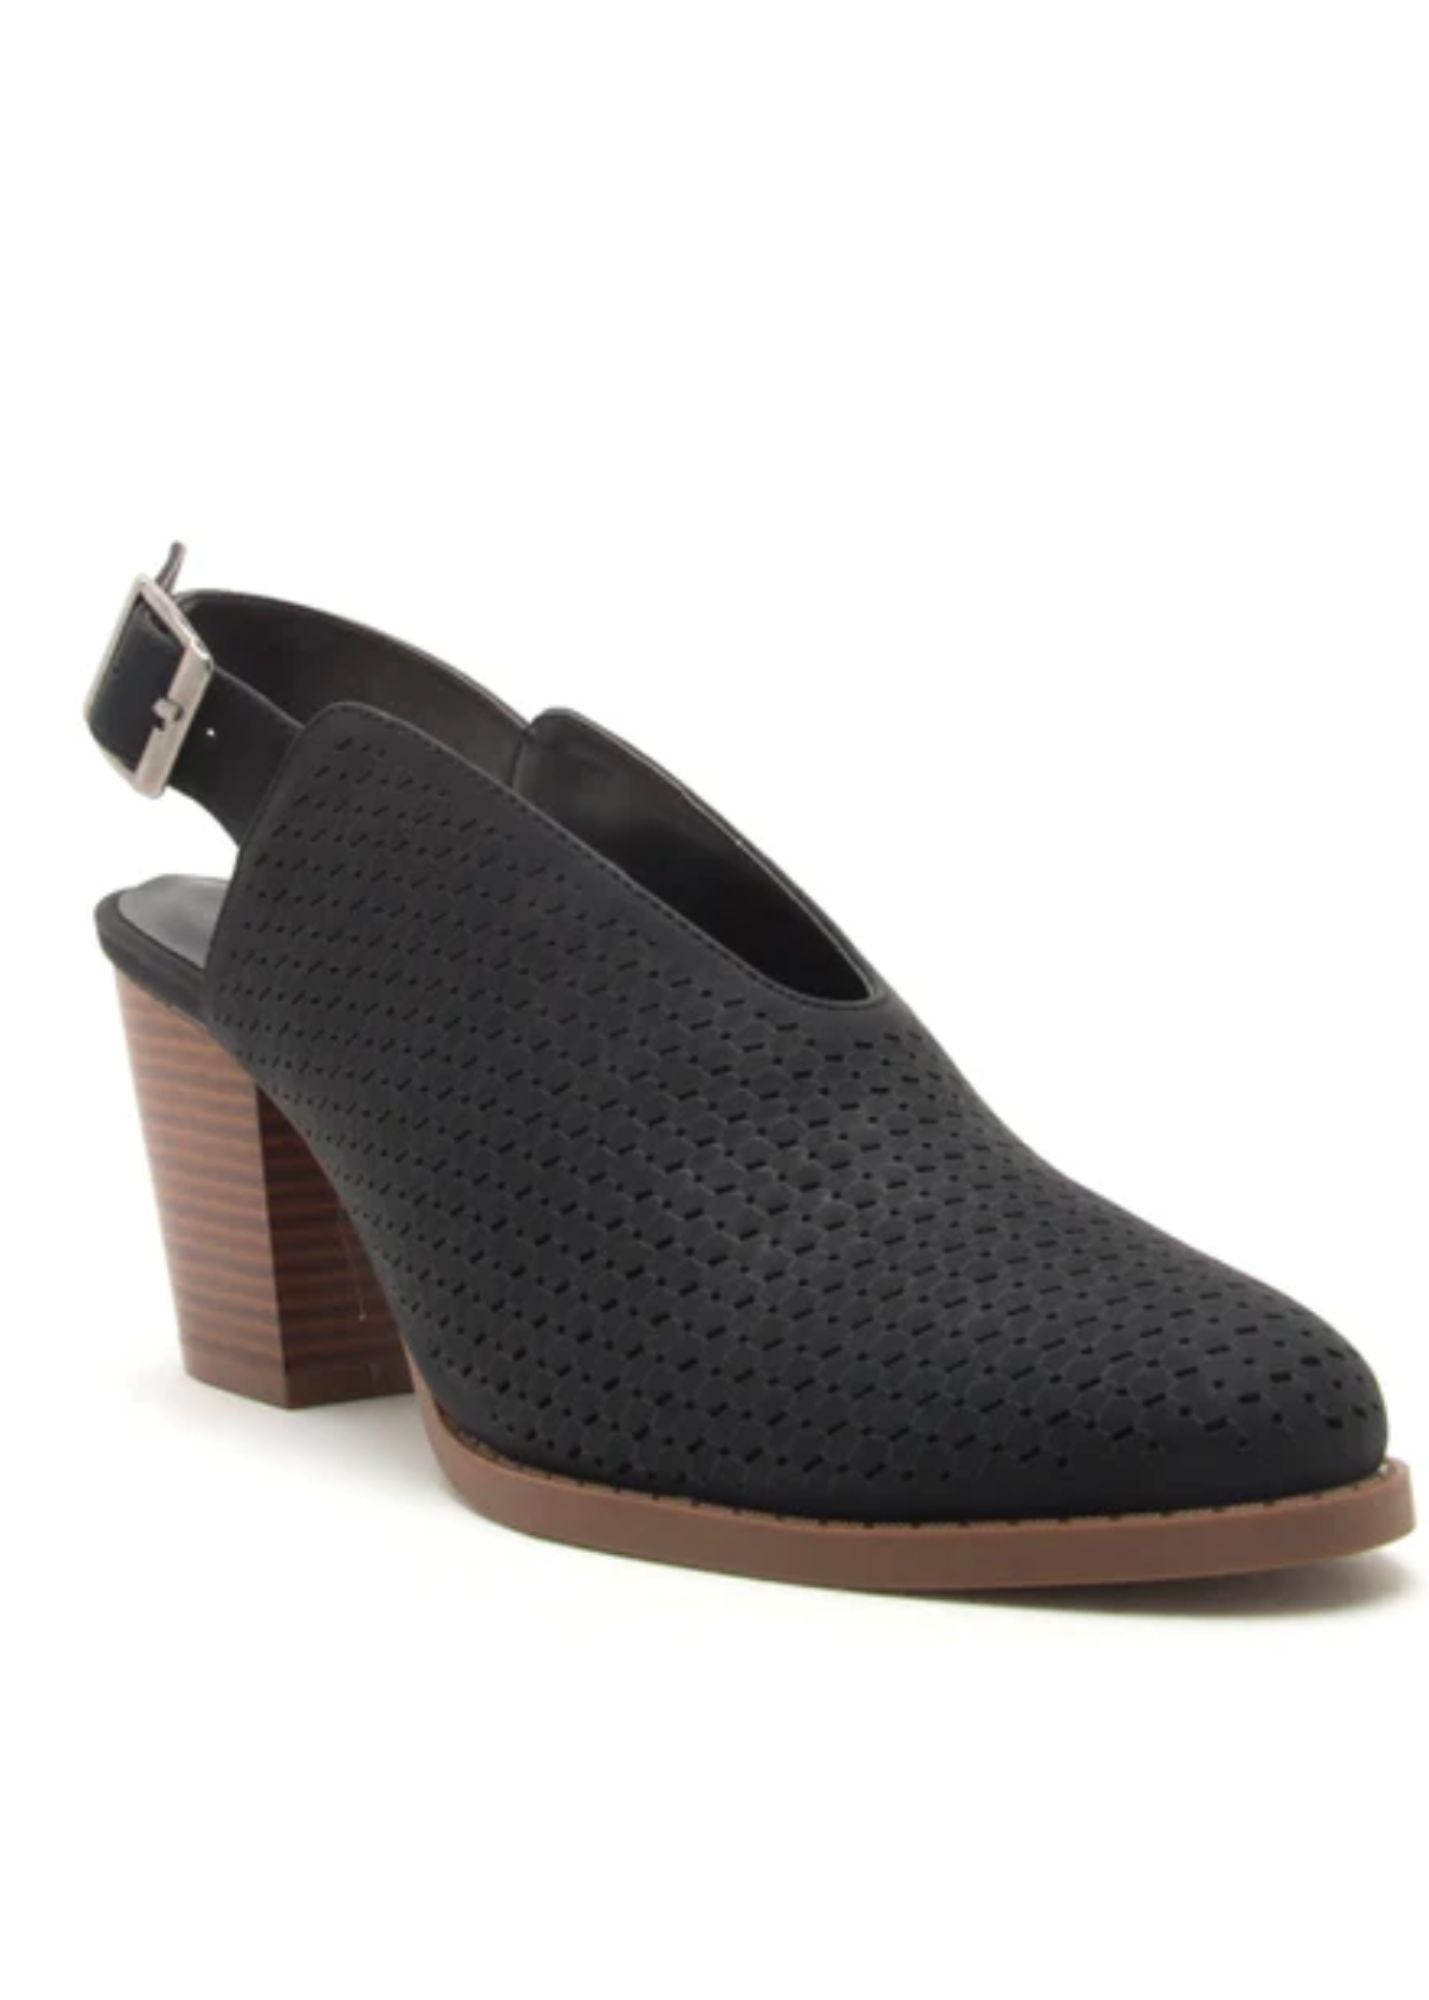 Perforated Slingback Heeled Bootie Shoes